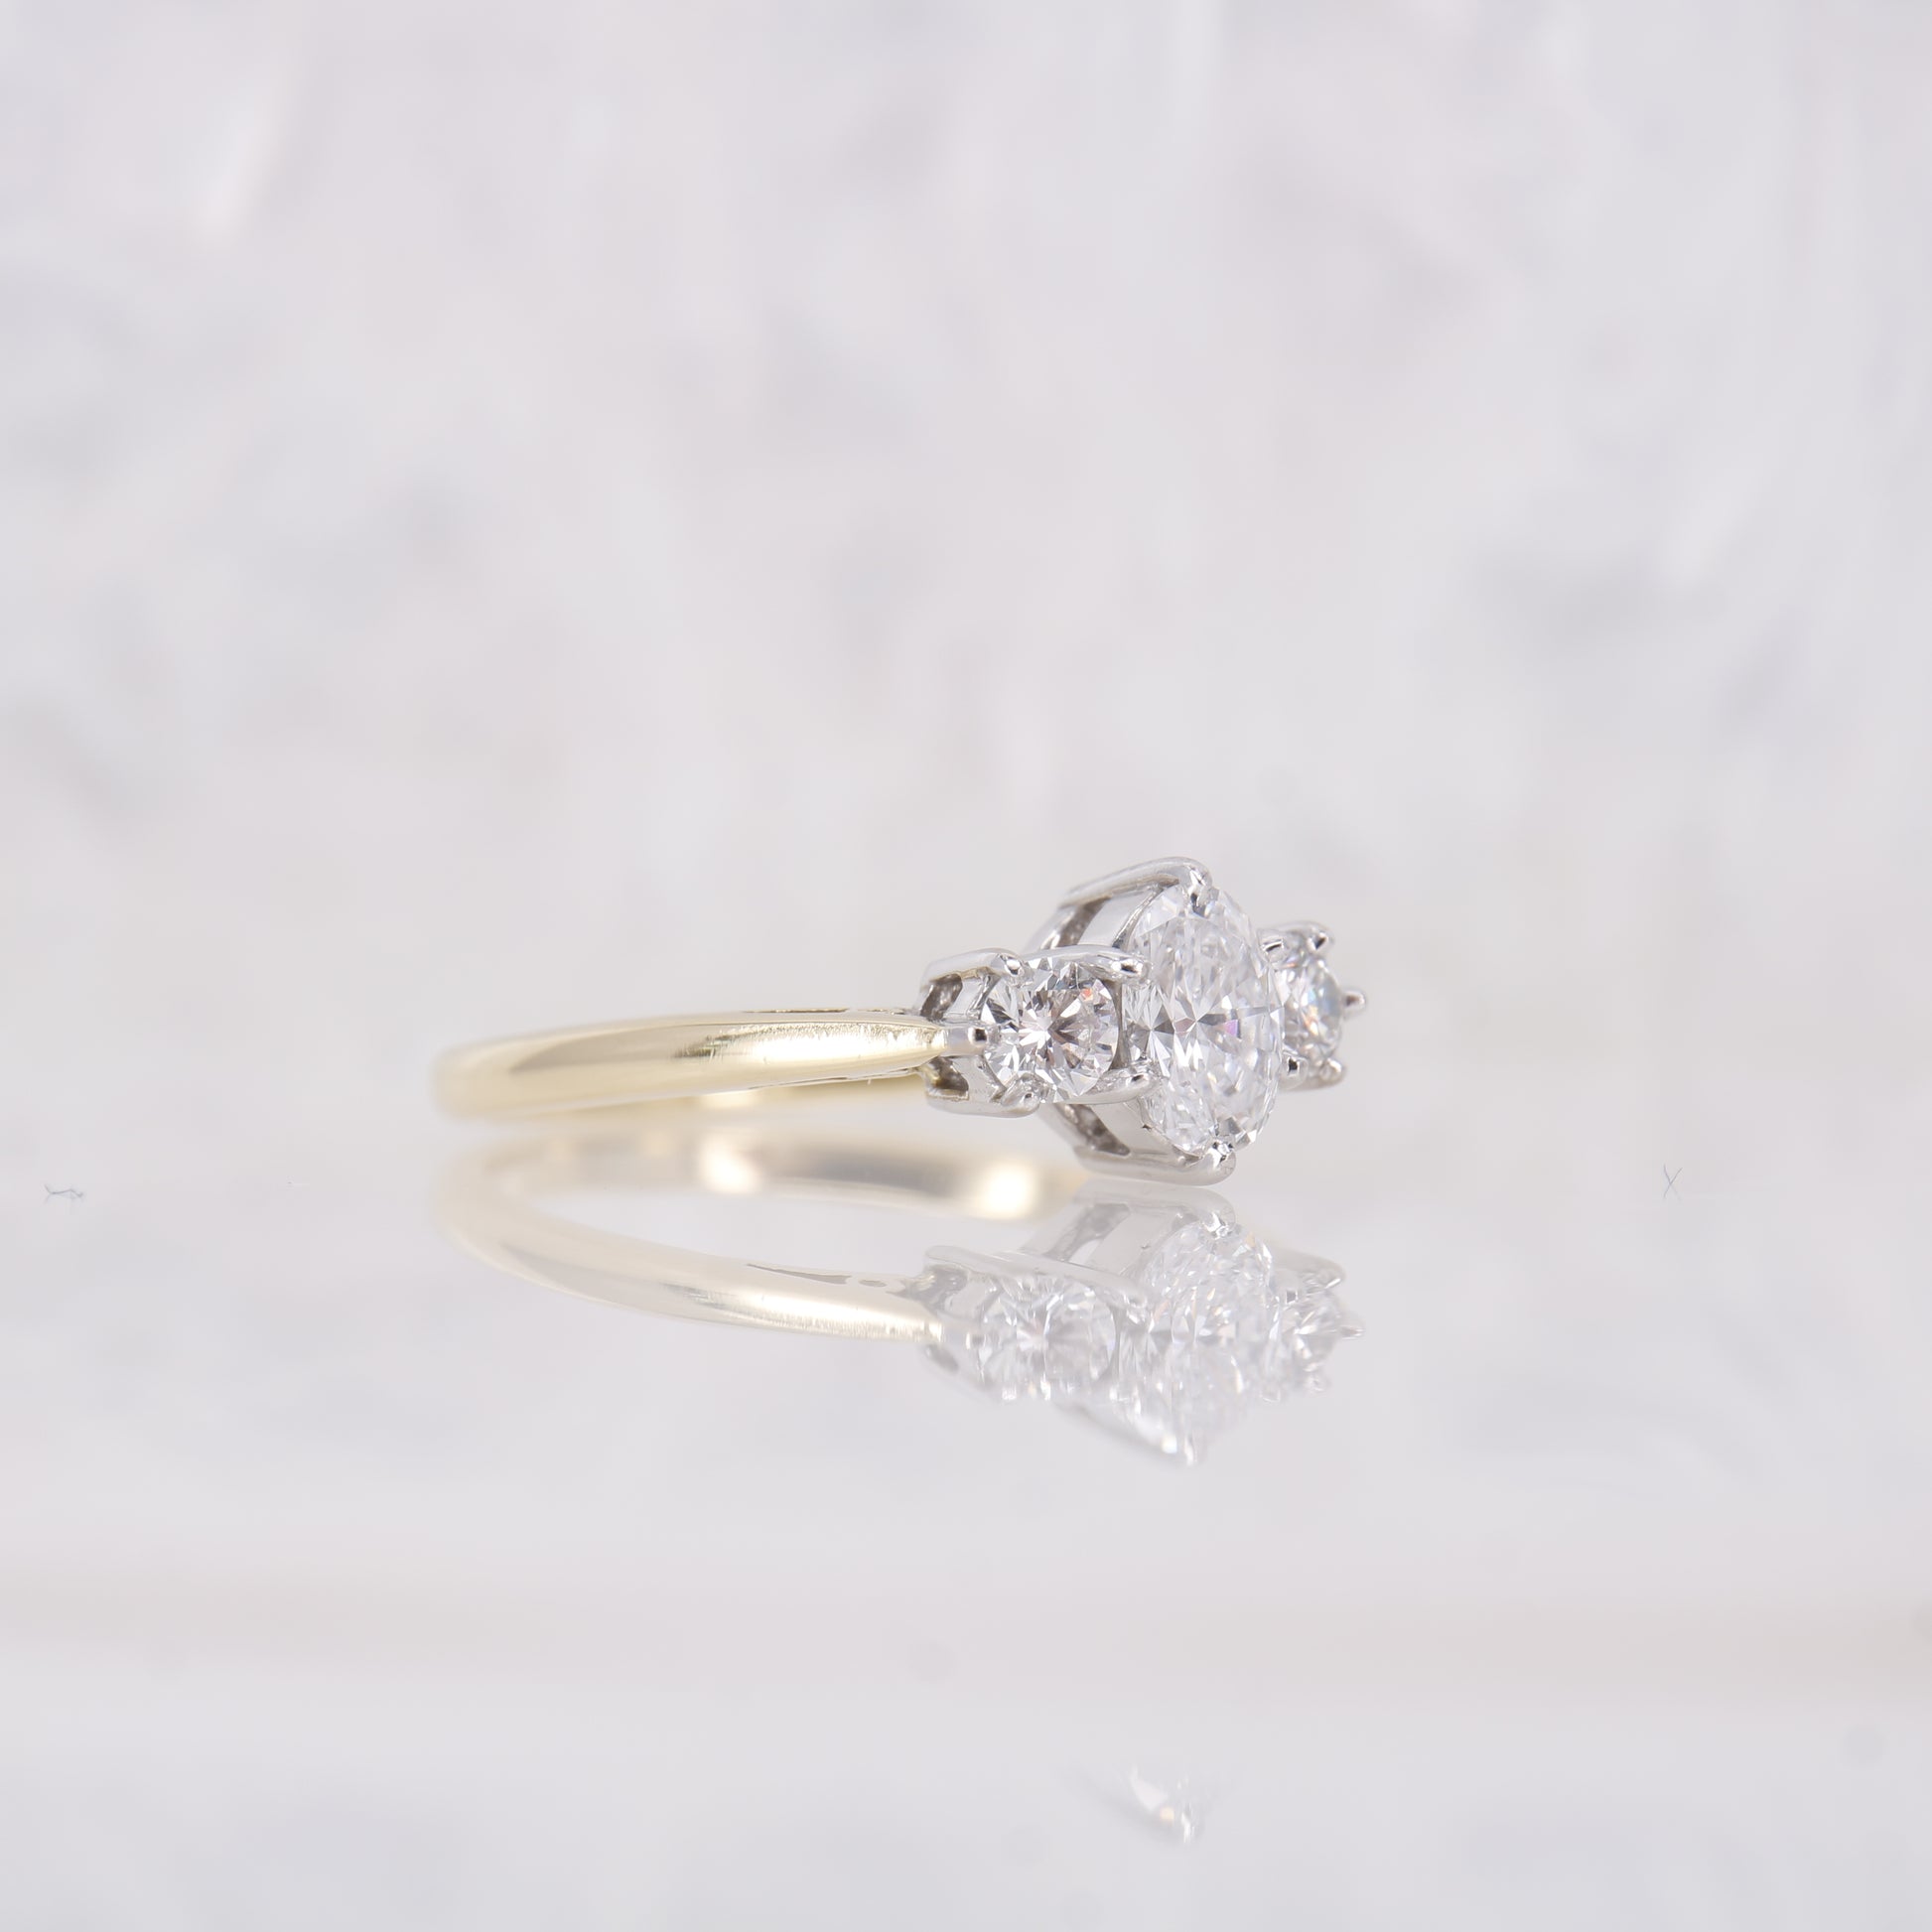 18ct yellow gold oval diamond engagement ring. Three stone oval diamond engagement ring. 